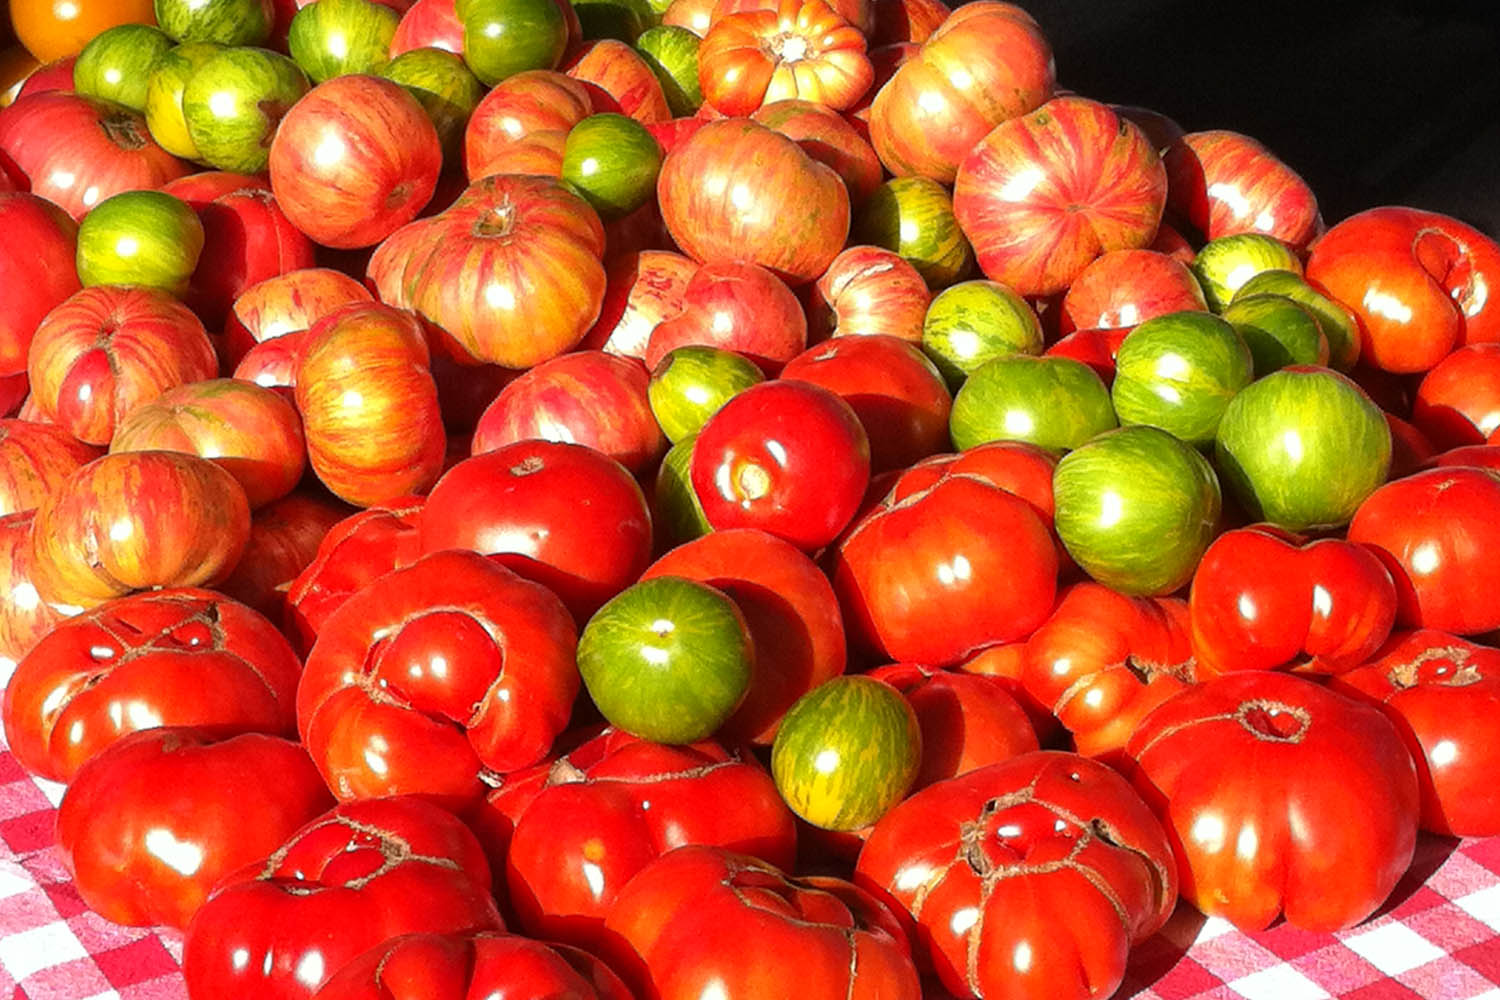 Heirloom Tomatoes at the South Lake Tahoe Farmers Market